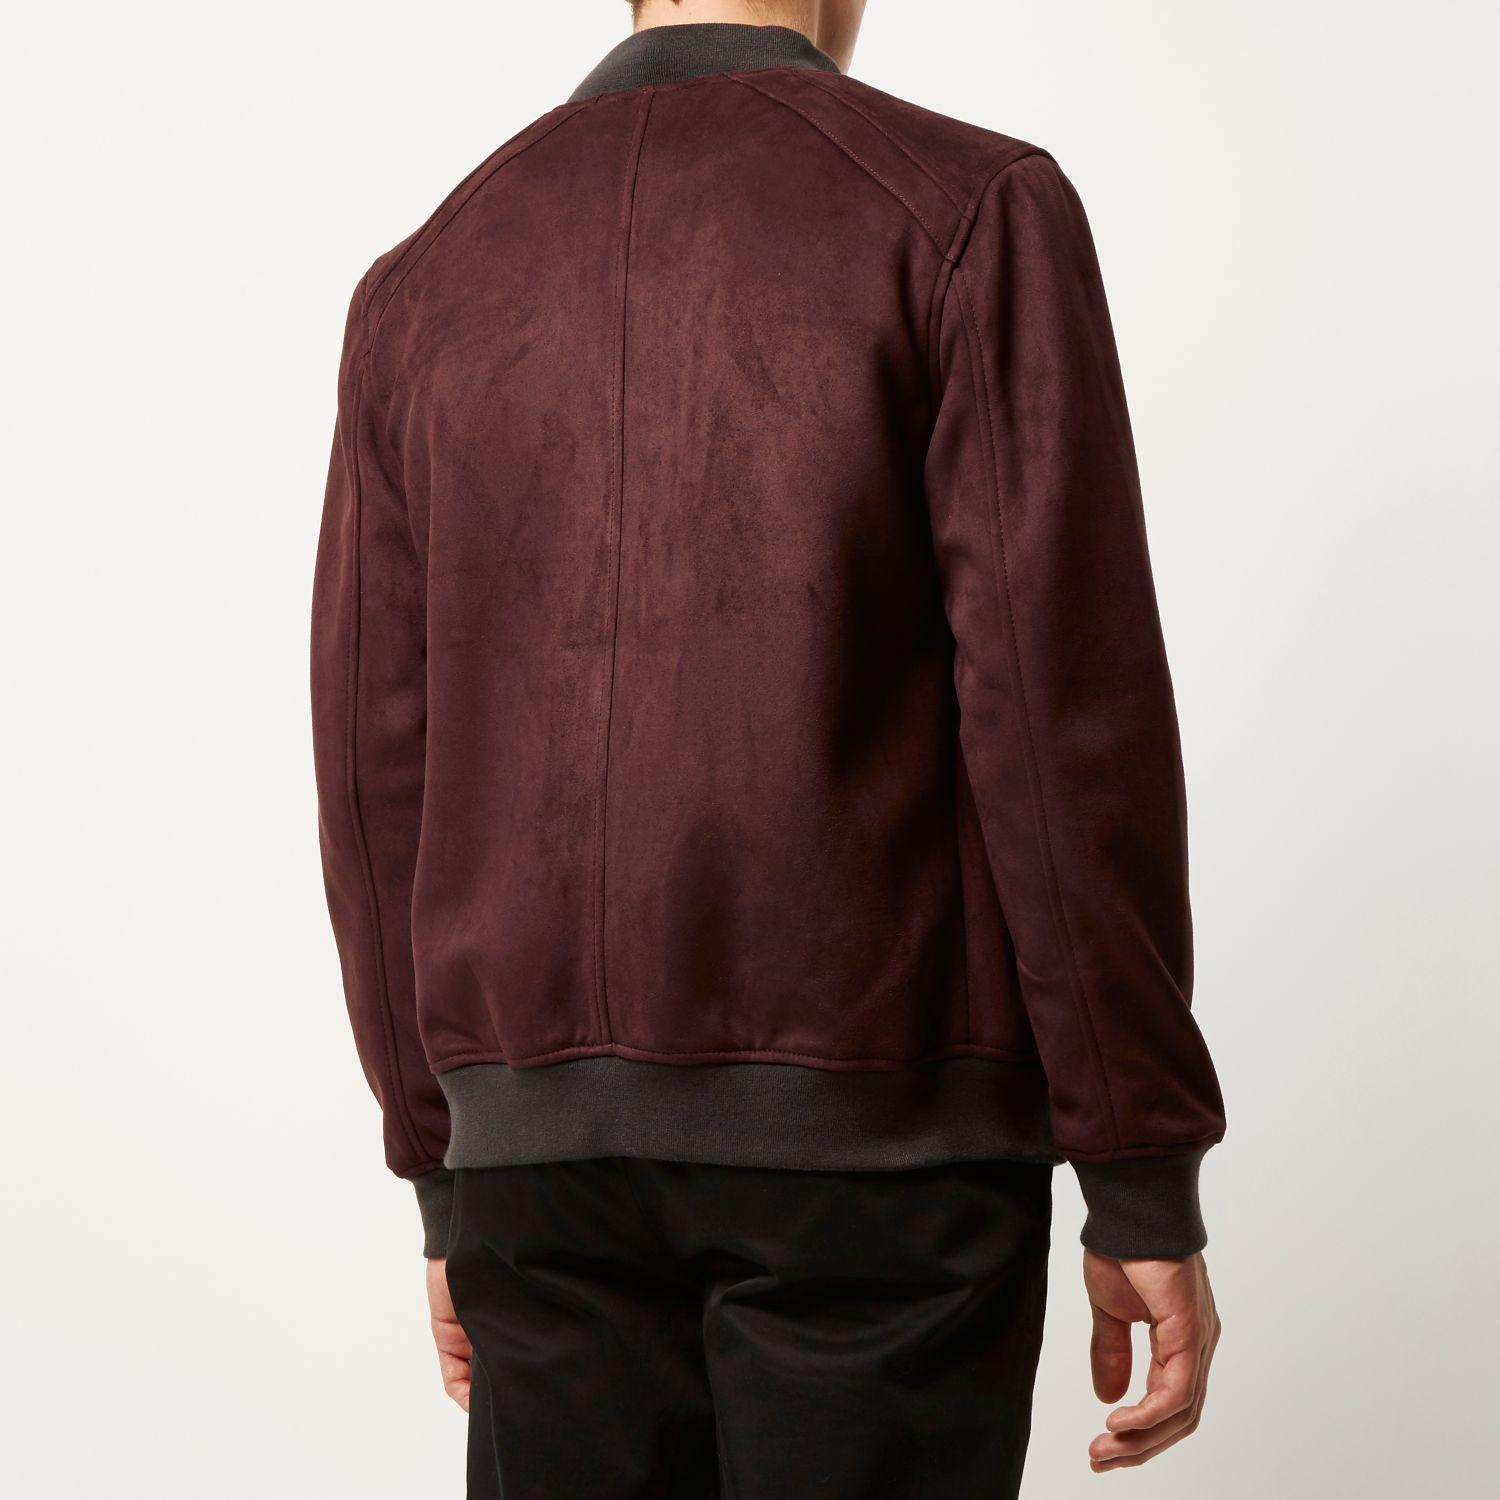 Lyst - River island Dark Red Faux-suede Bomber Jacket in Red for Men